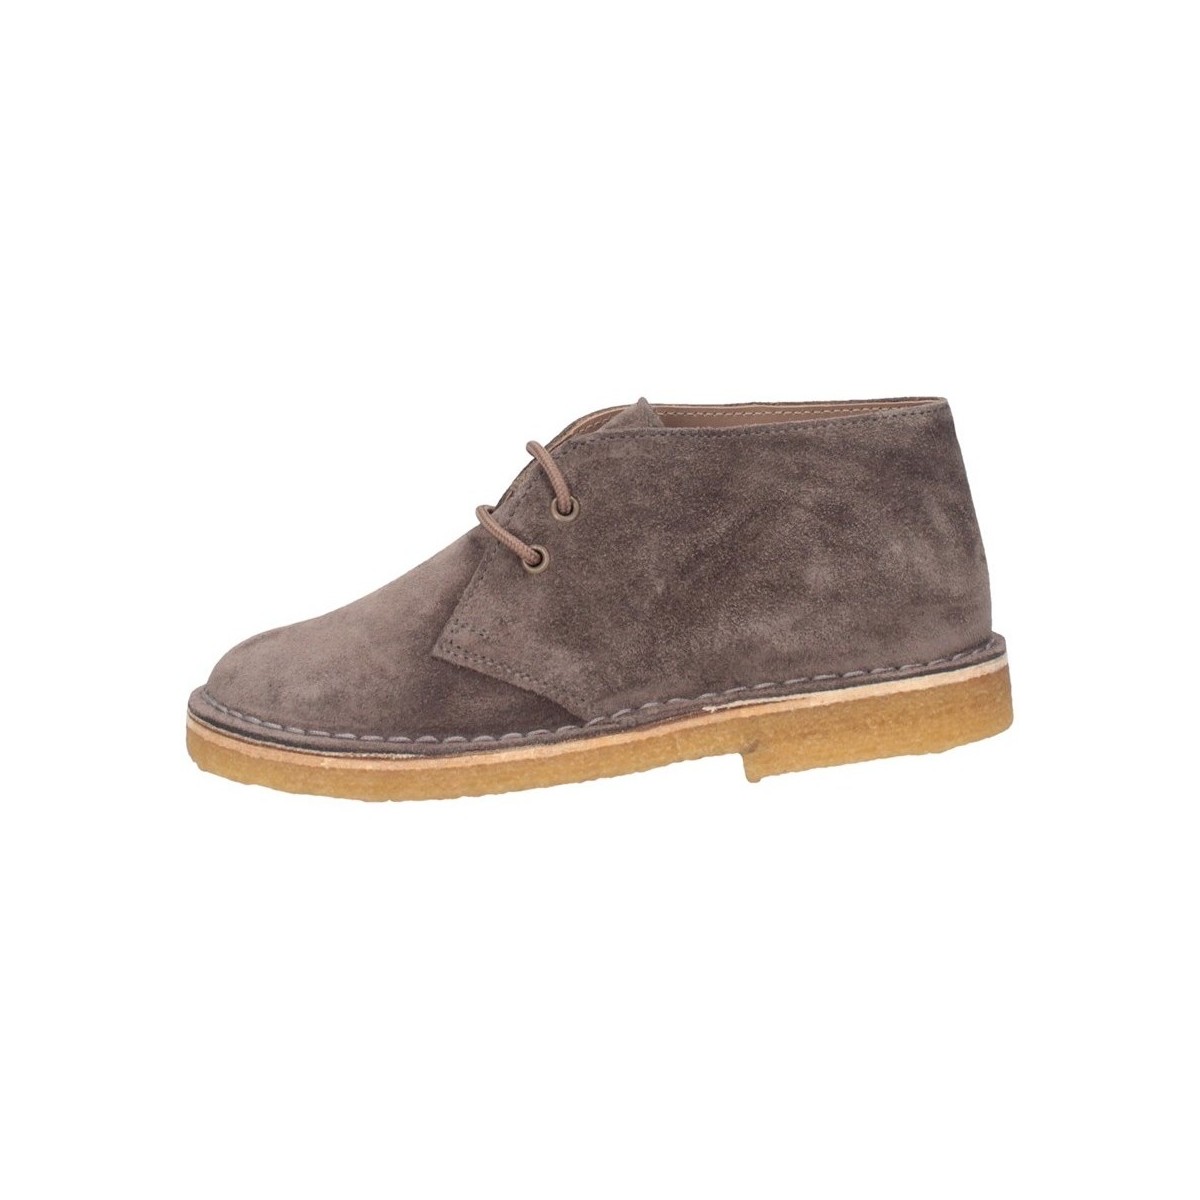 Schuhe Jungen Boots Two Con Me By Pepe' Two Con Me By Pepe' TWO/I7N-SU Ankle Kind grau Grau